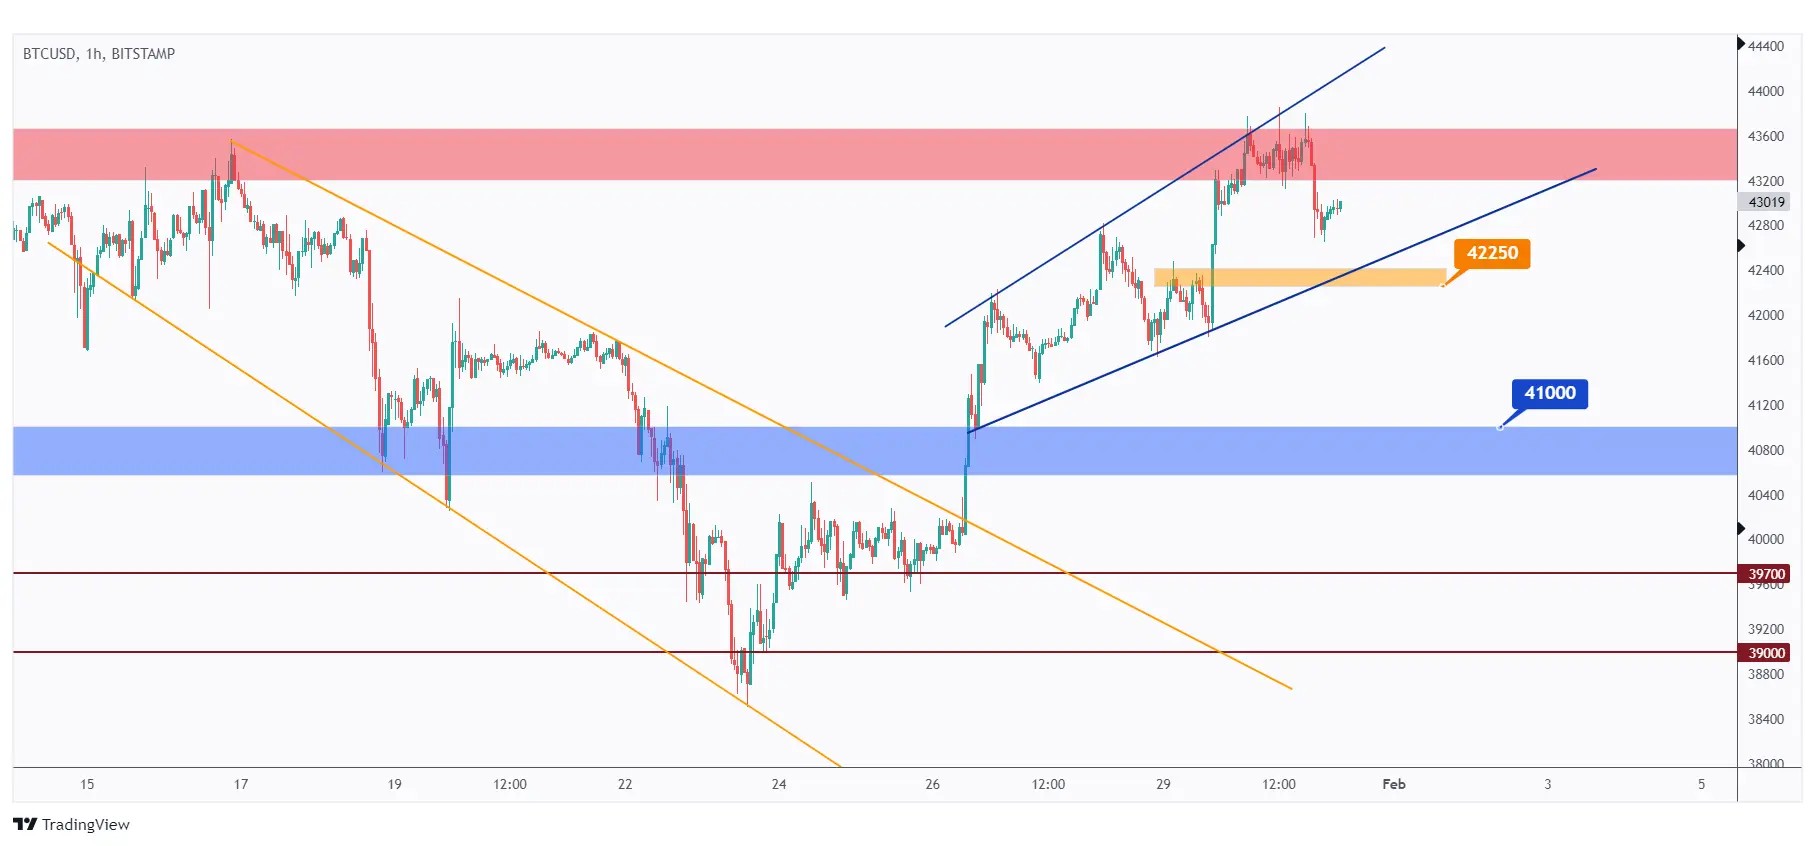 btc 1h chart showing the overall short-term bullish movement inside a rising wedge pattern.